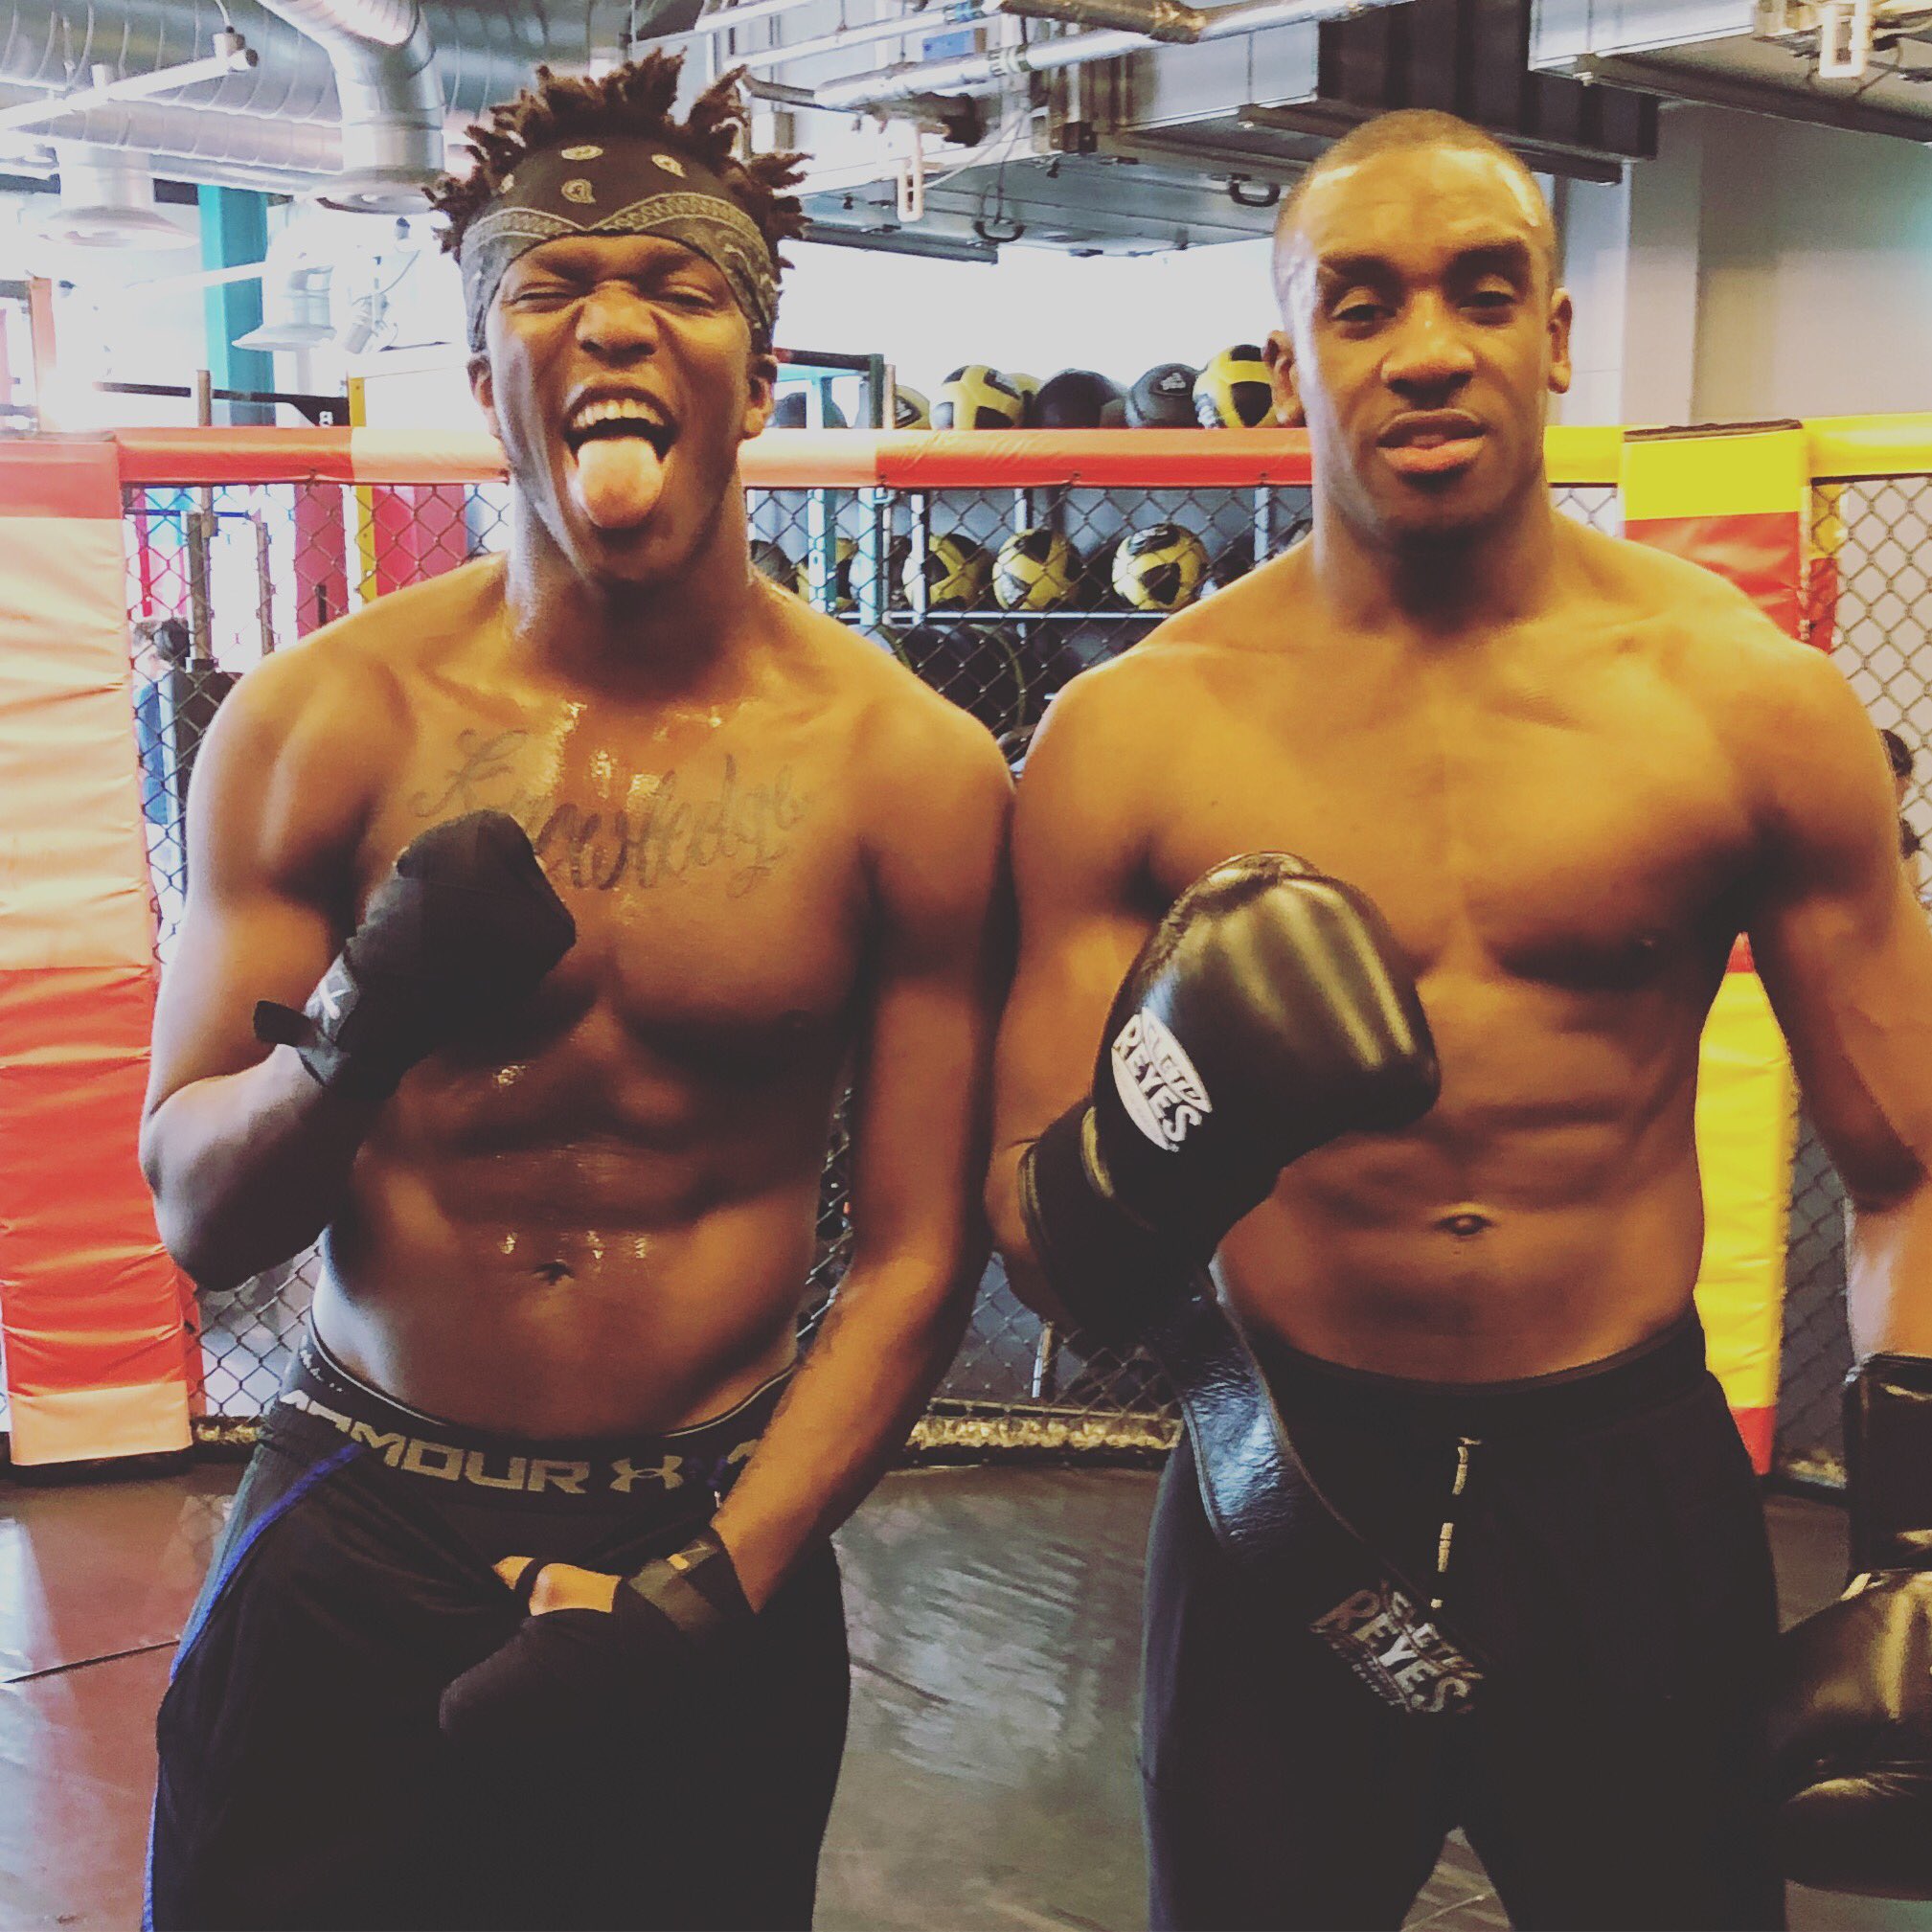 KSI on Twitter: "Good sparring session with